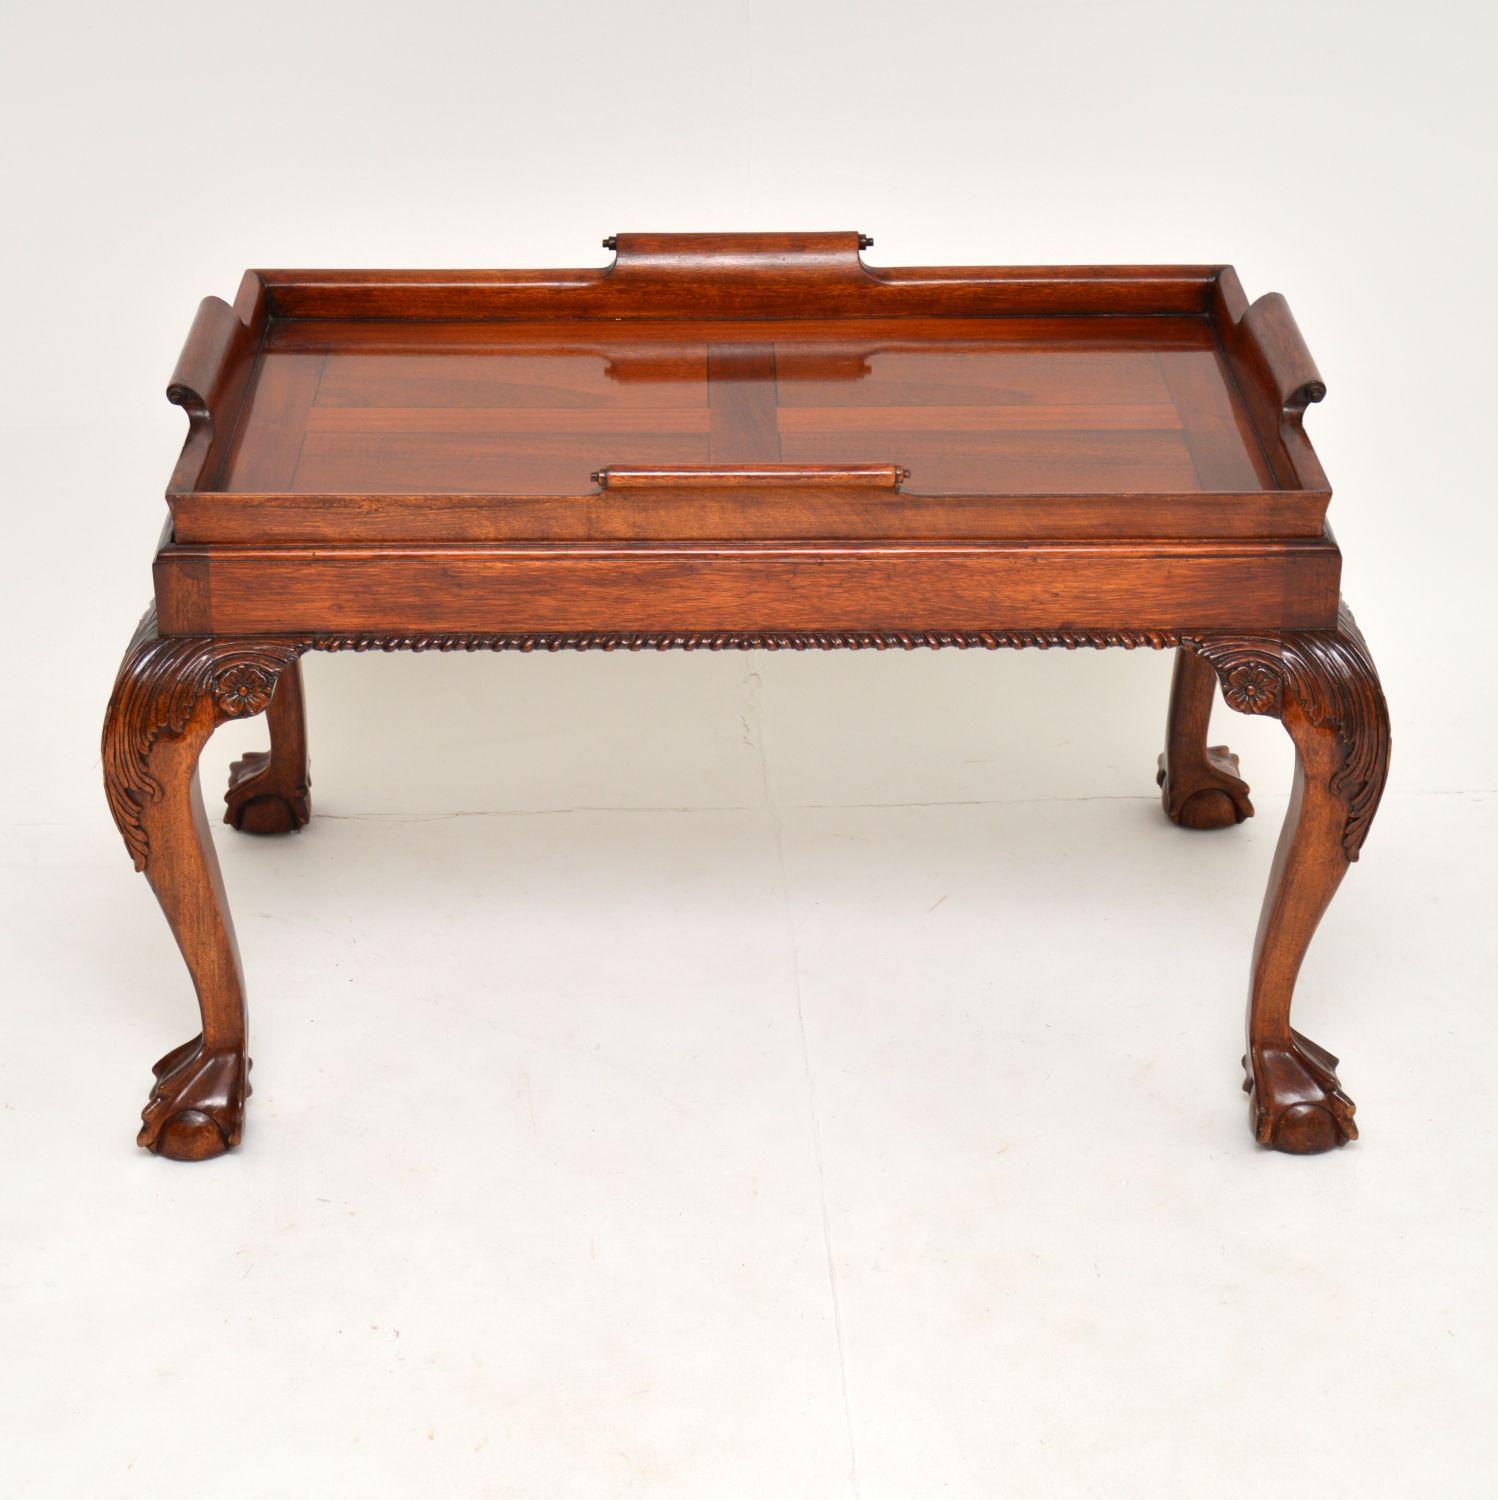 A stunning mahogany tray top coffee table of extremely fine quality. This is beautifully made in the antique Chippendale style, it dates from circa 1930s.

There is absolutely stunning and deep carving throughout, with acanthus leaf knees, claw